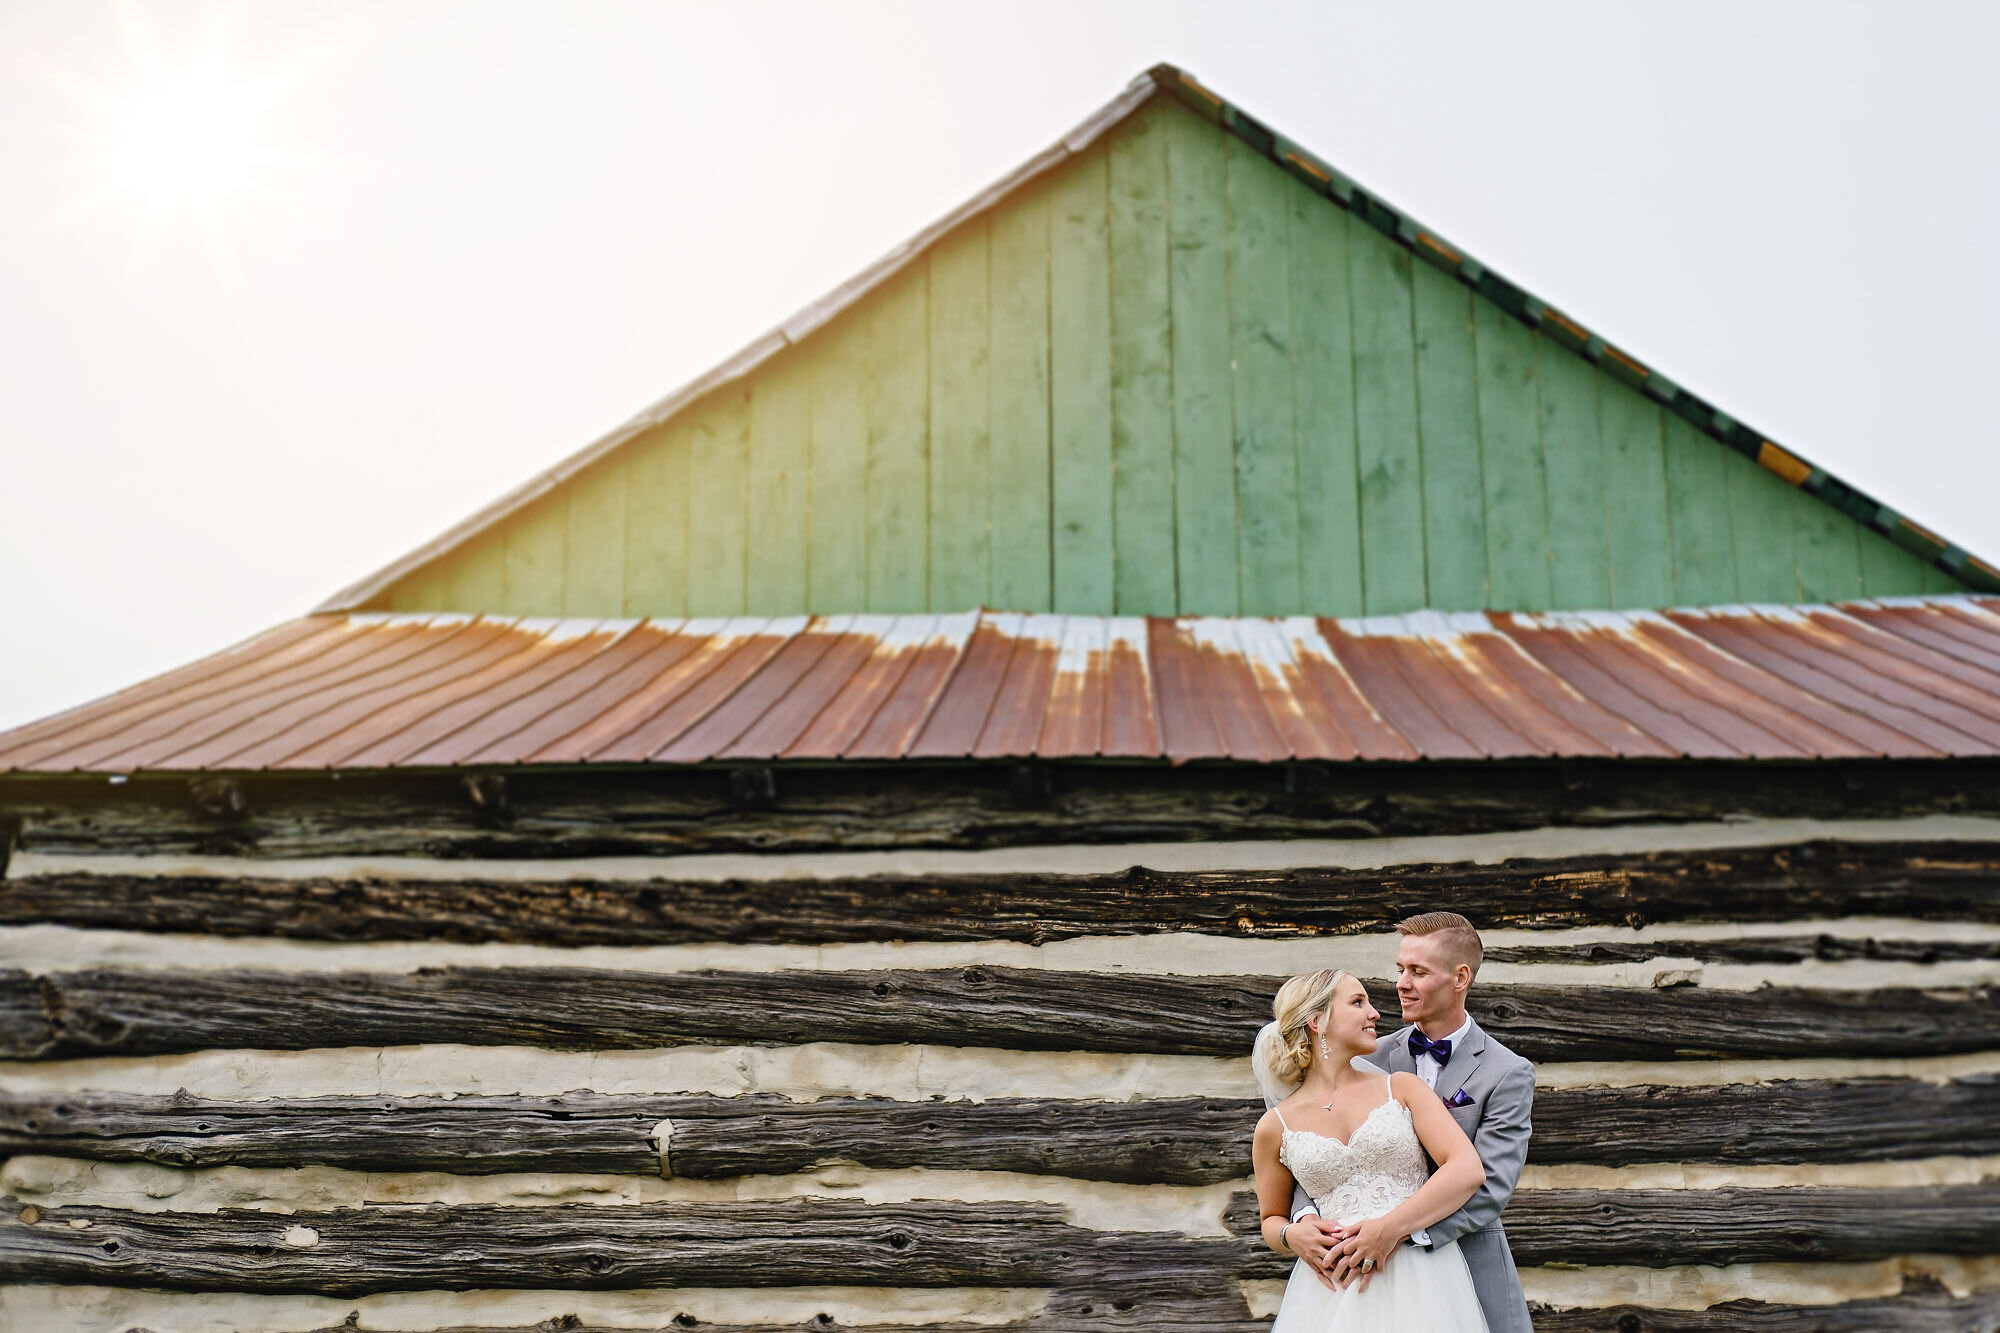 Photograph of bride and groom standing in an embrace in front of log cabin with green roof